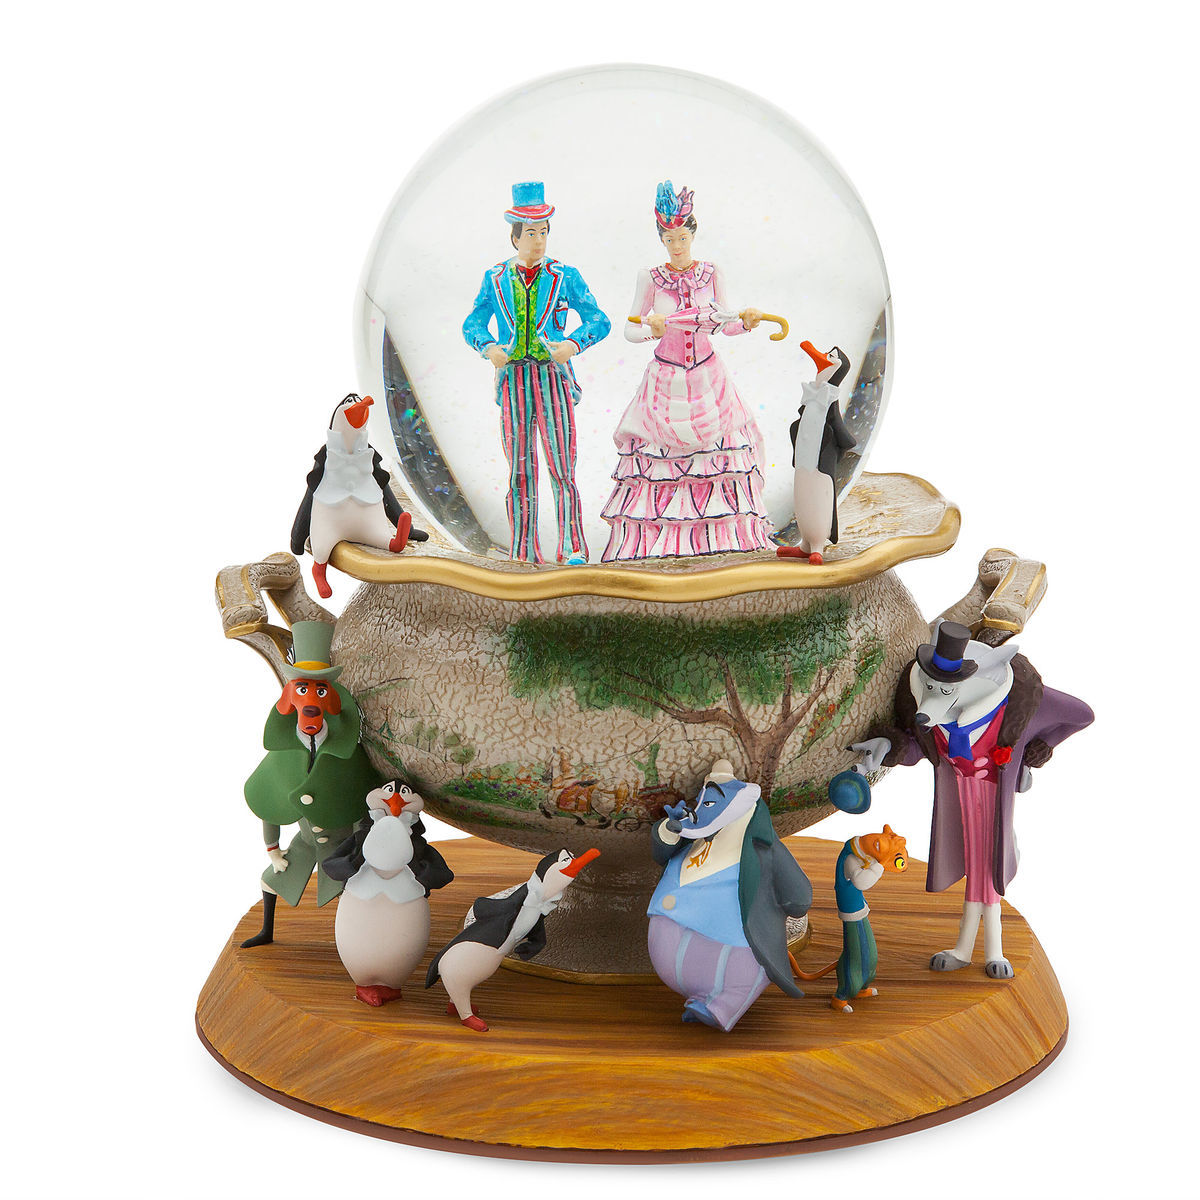 Mary Poppins Returns Snow Globe Out Now